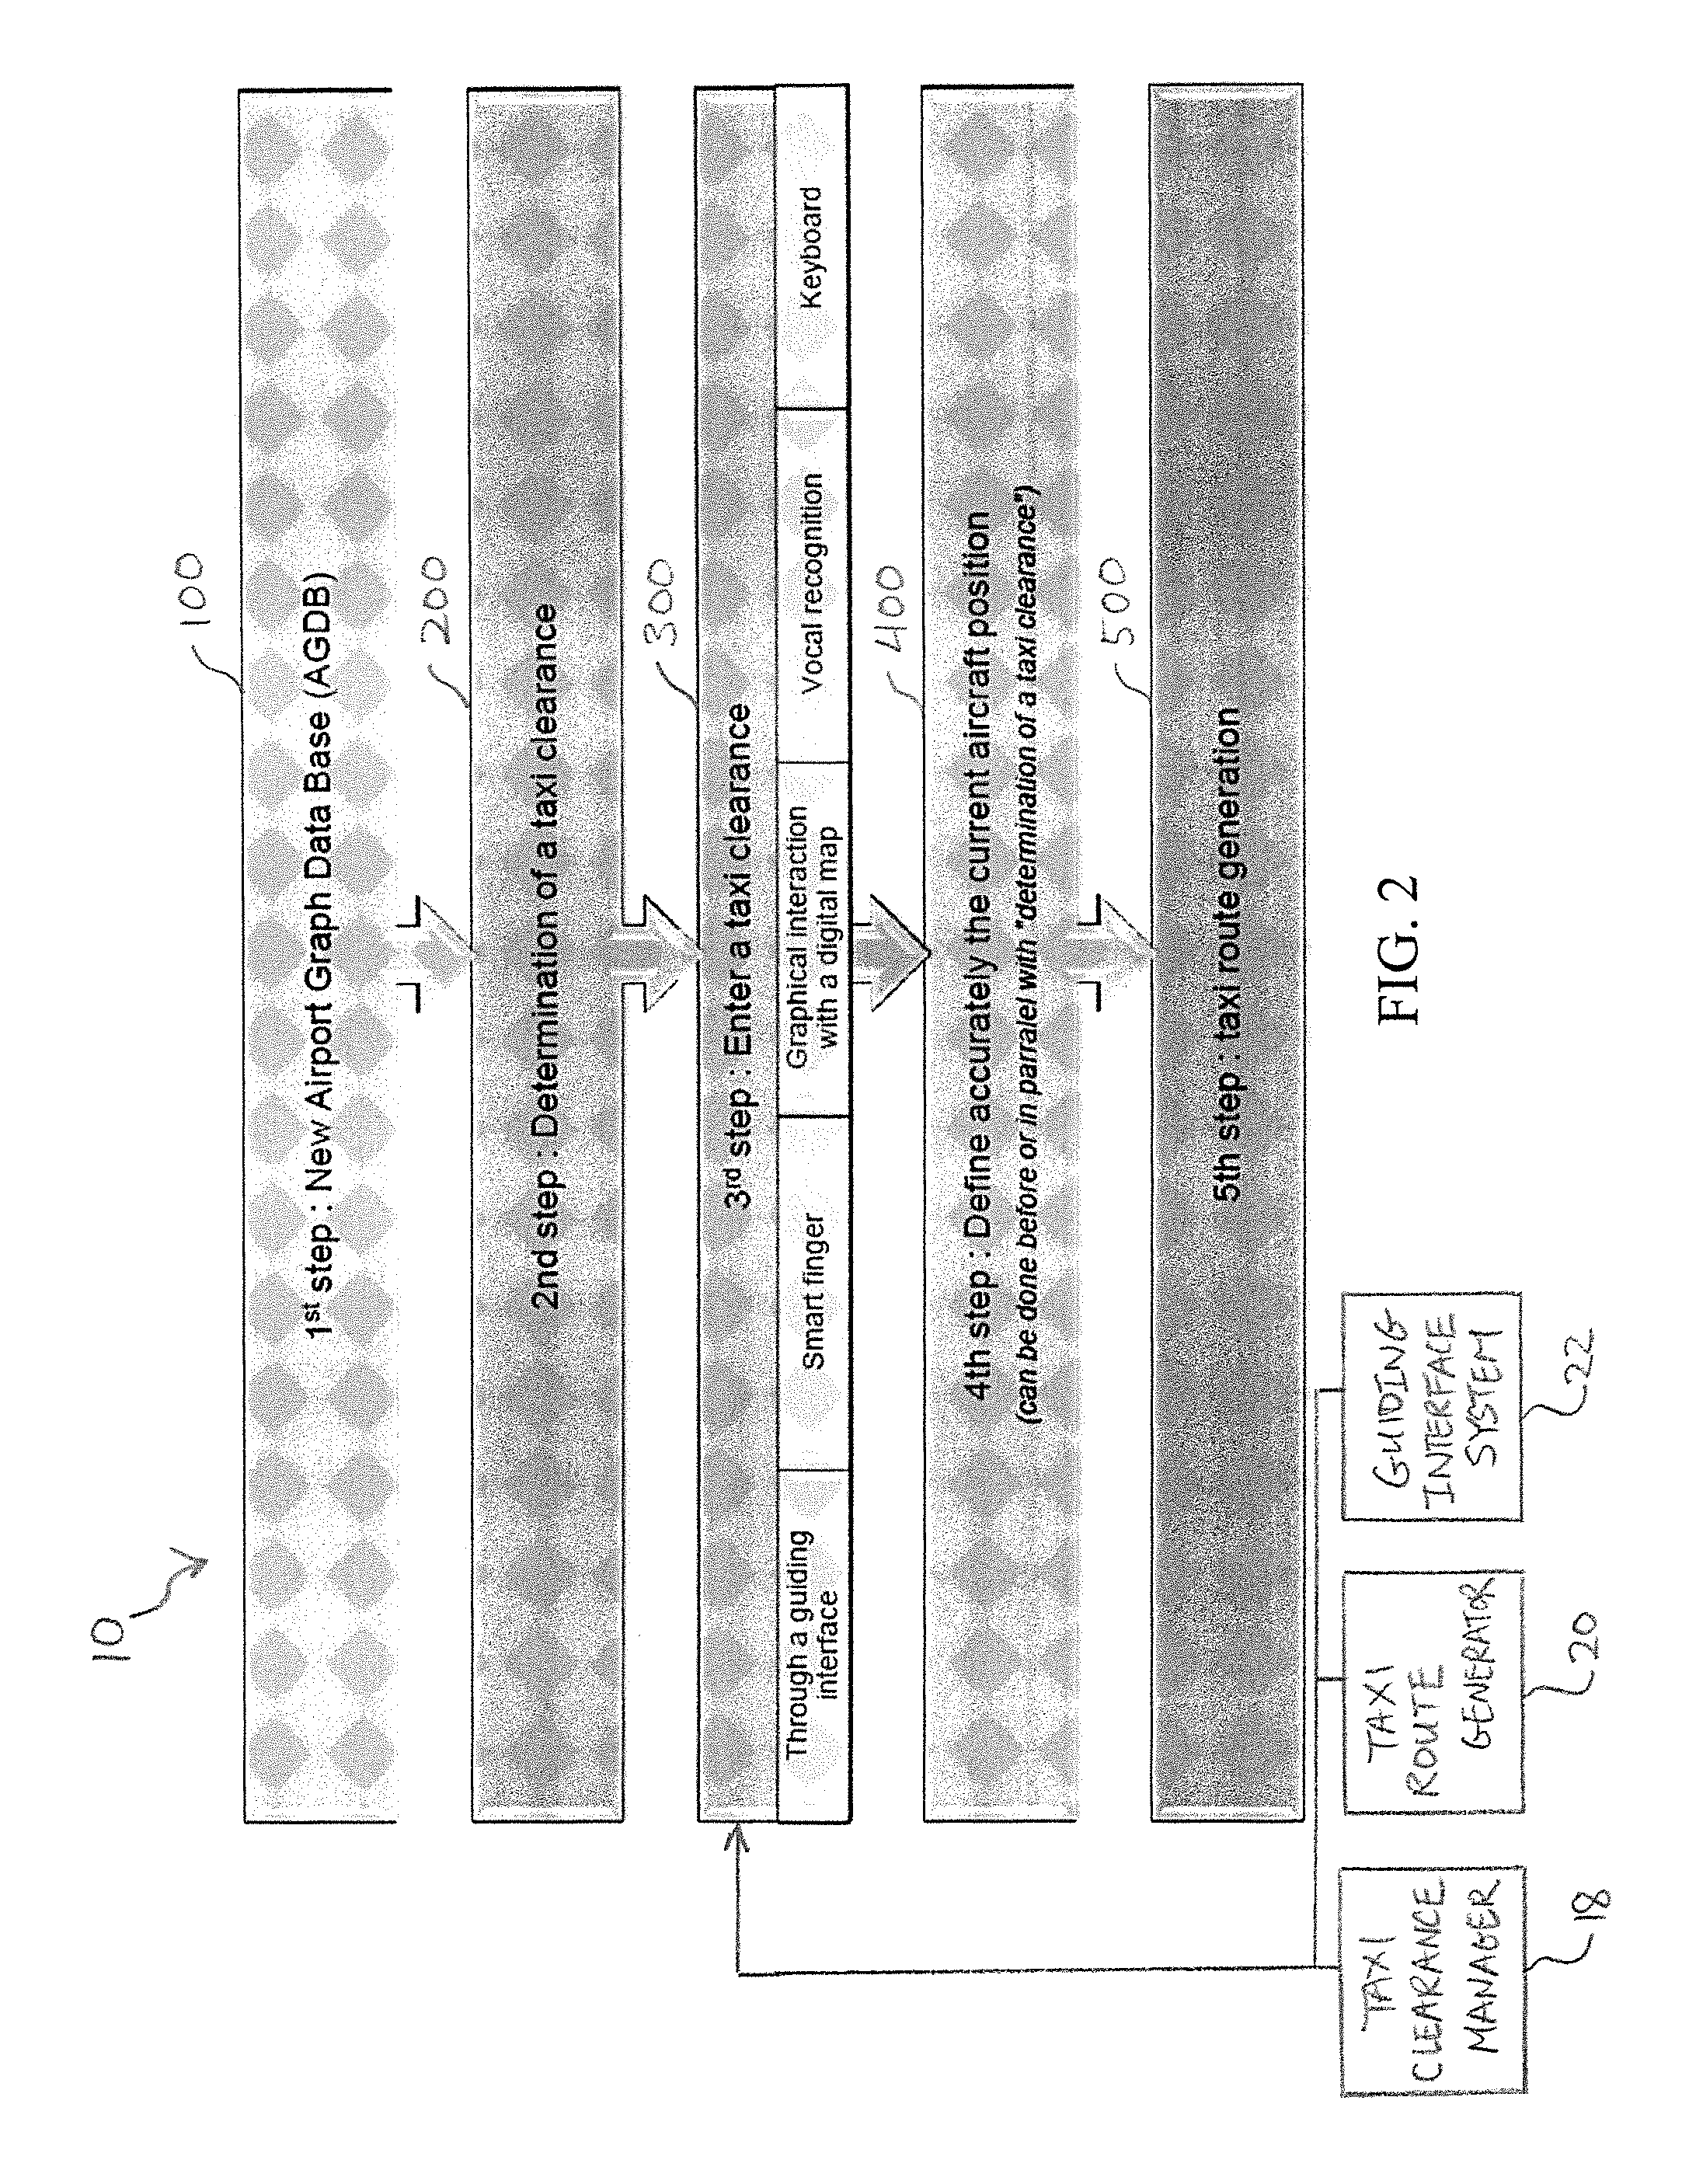 Systems and methods for providing optimized taxiing path operation for an aircraft